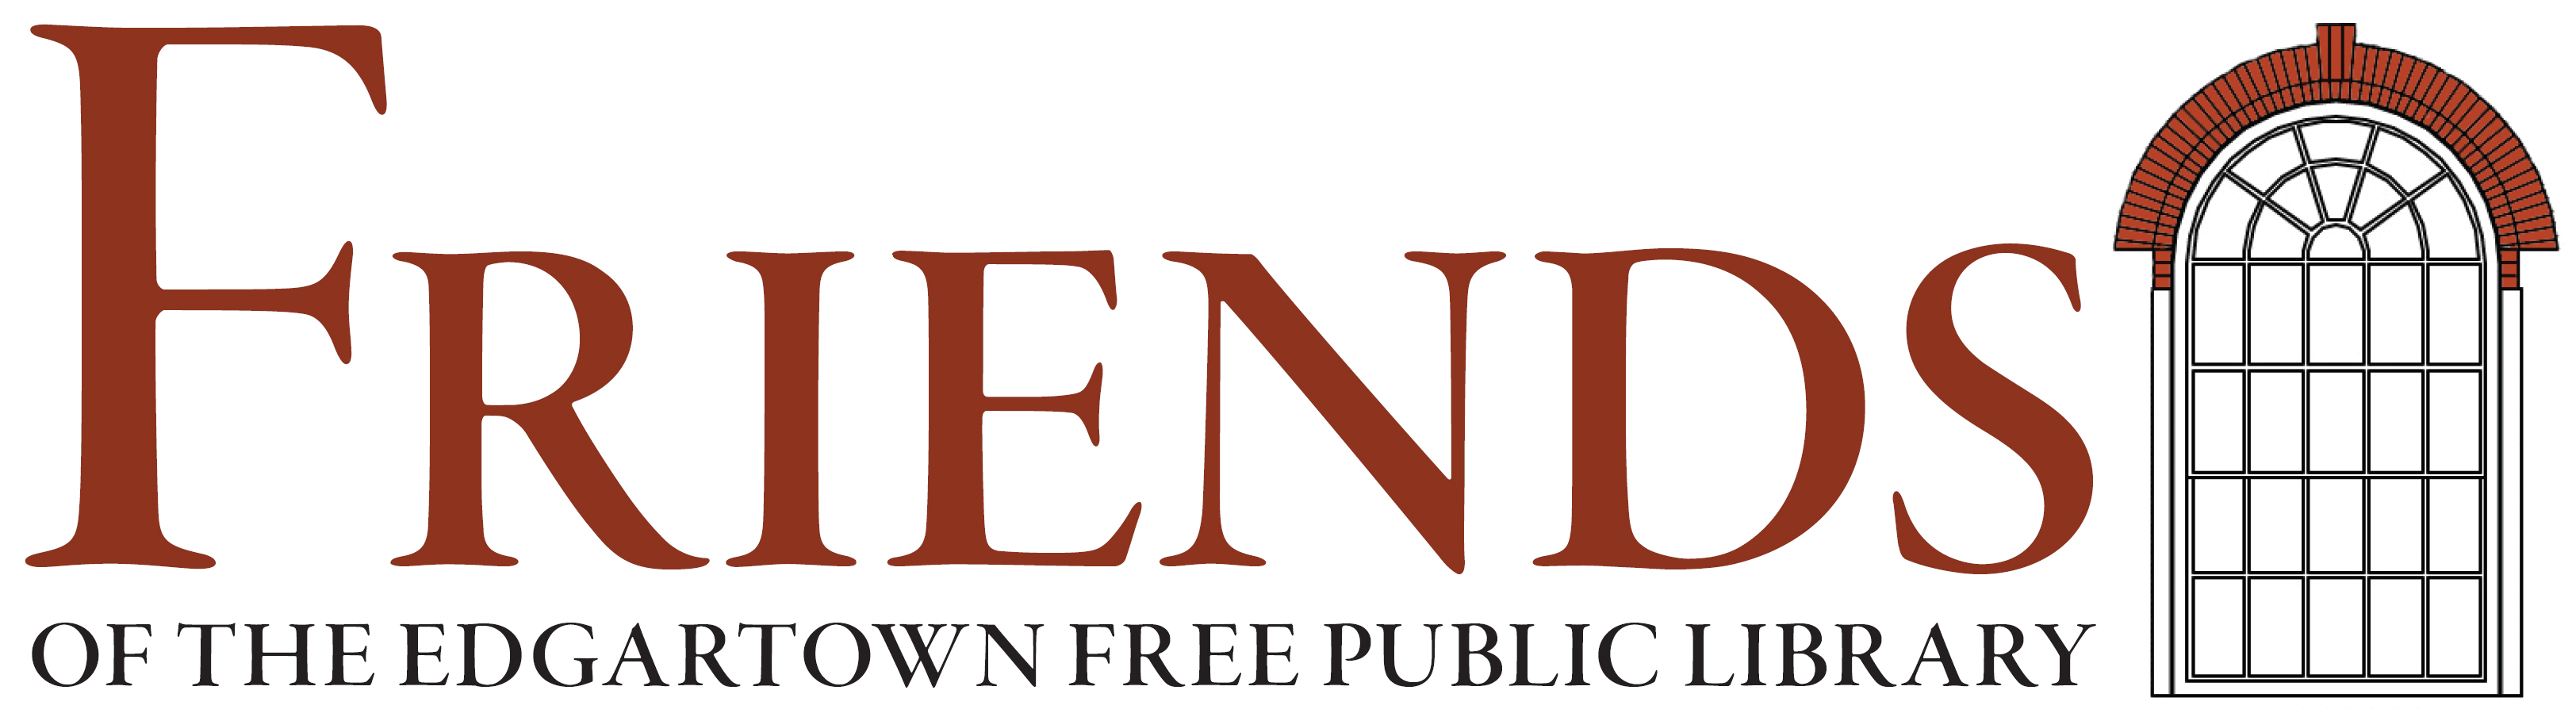 Friends of the Edgartown Free Public Library